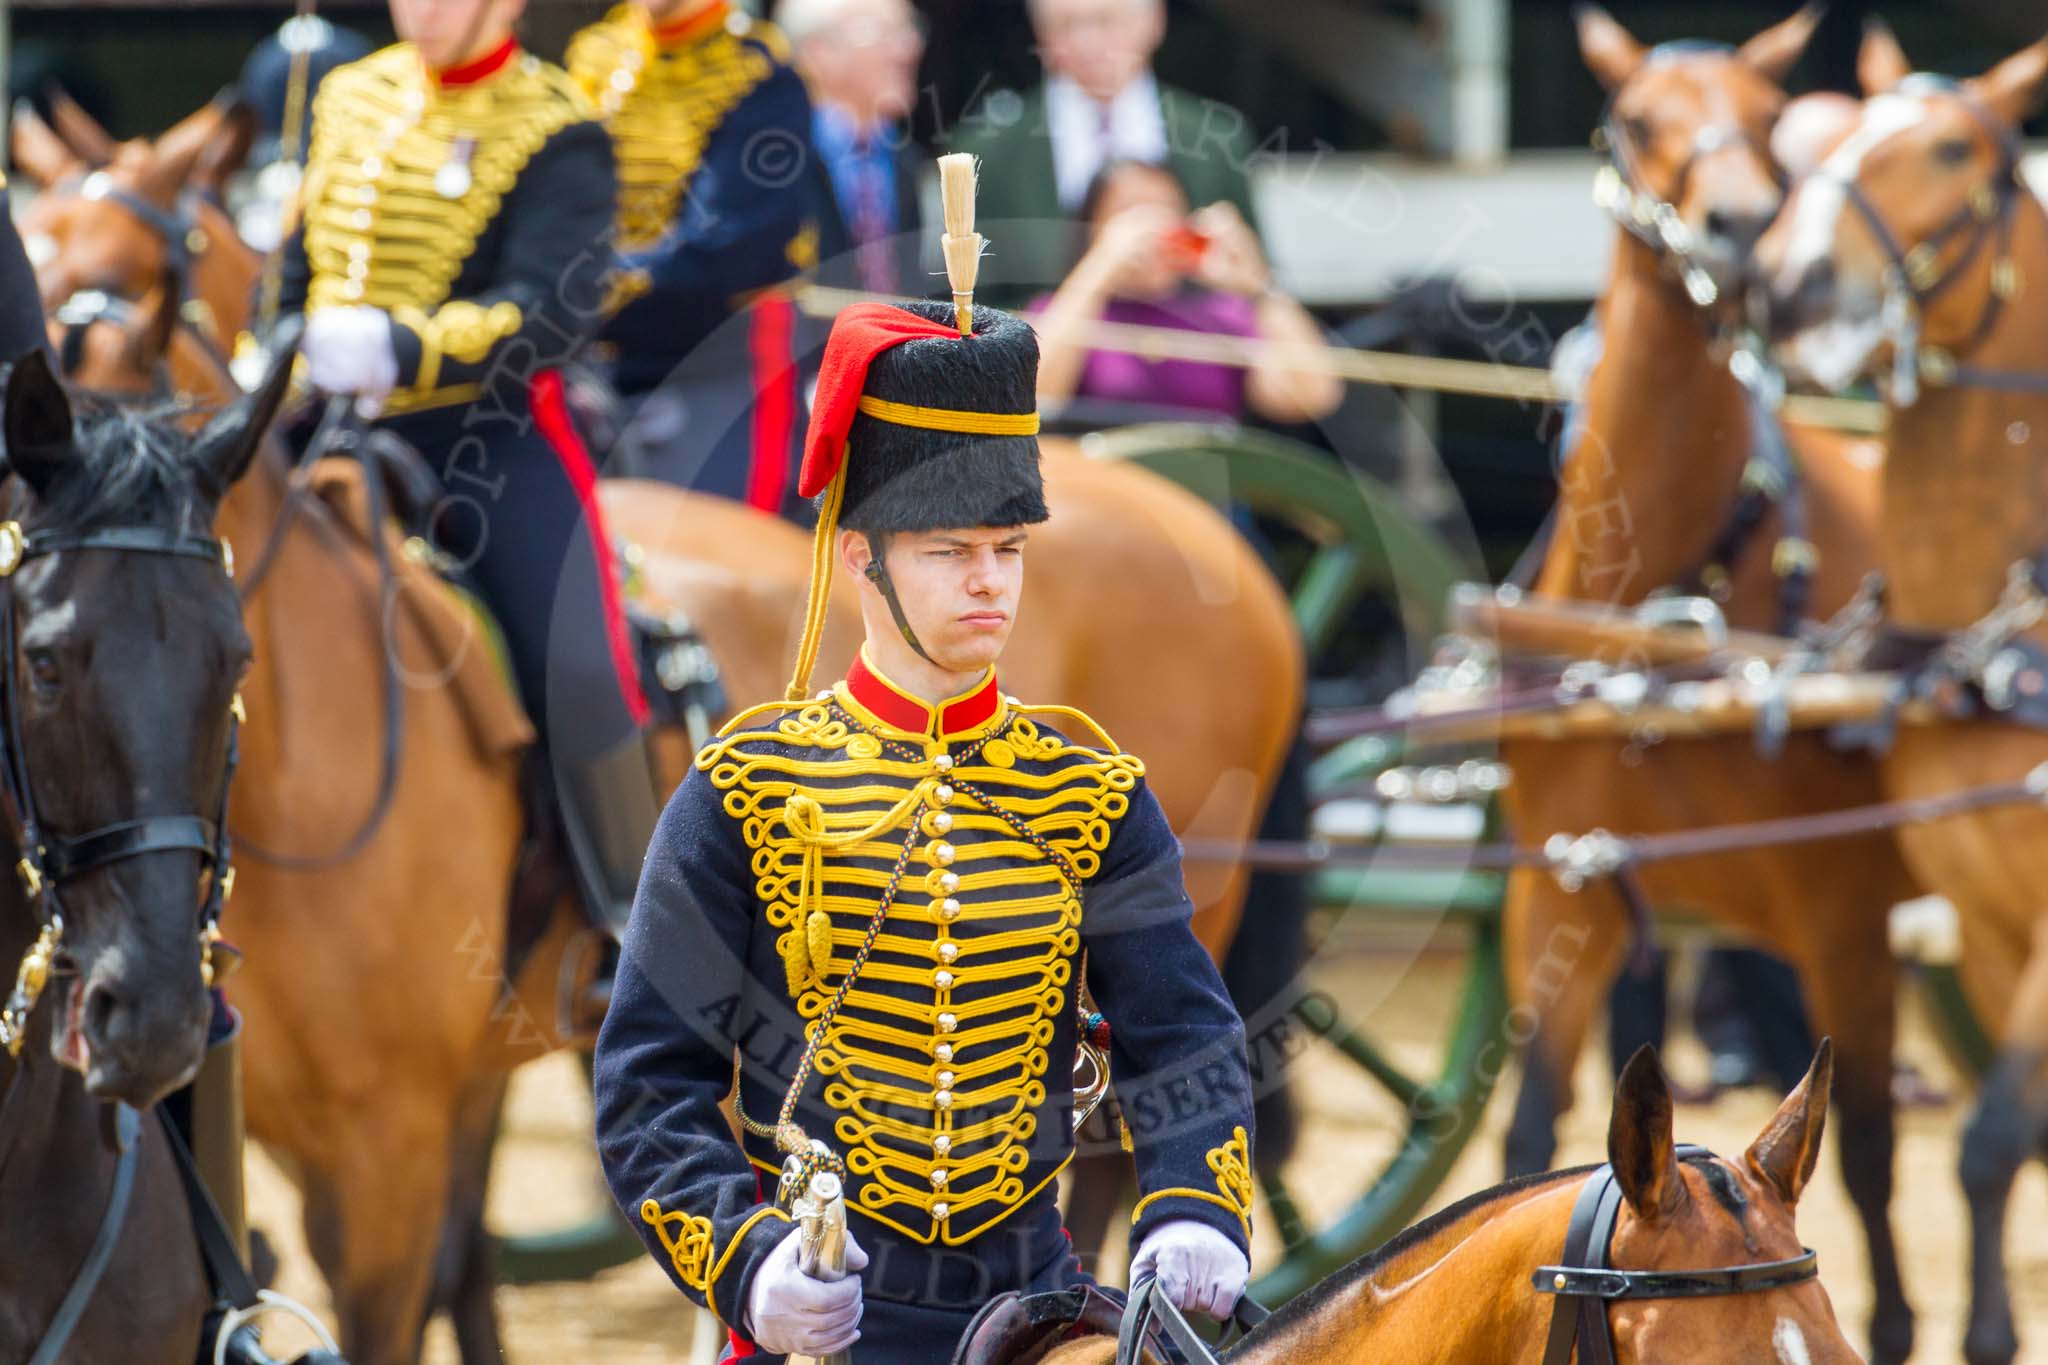 The Colonel's Review 2014.
Horse Guards Parade, Westminster,
London,

United Kingdom,
on 07 June 2014 at 11:52, image #603